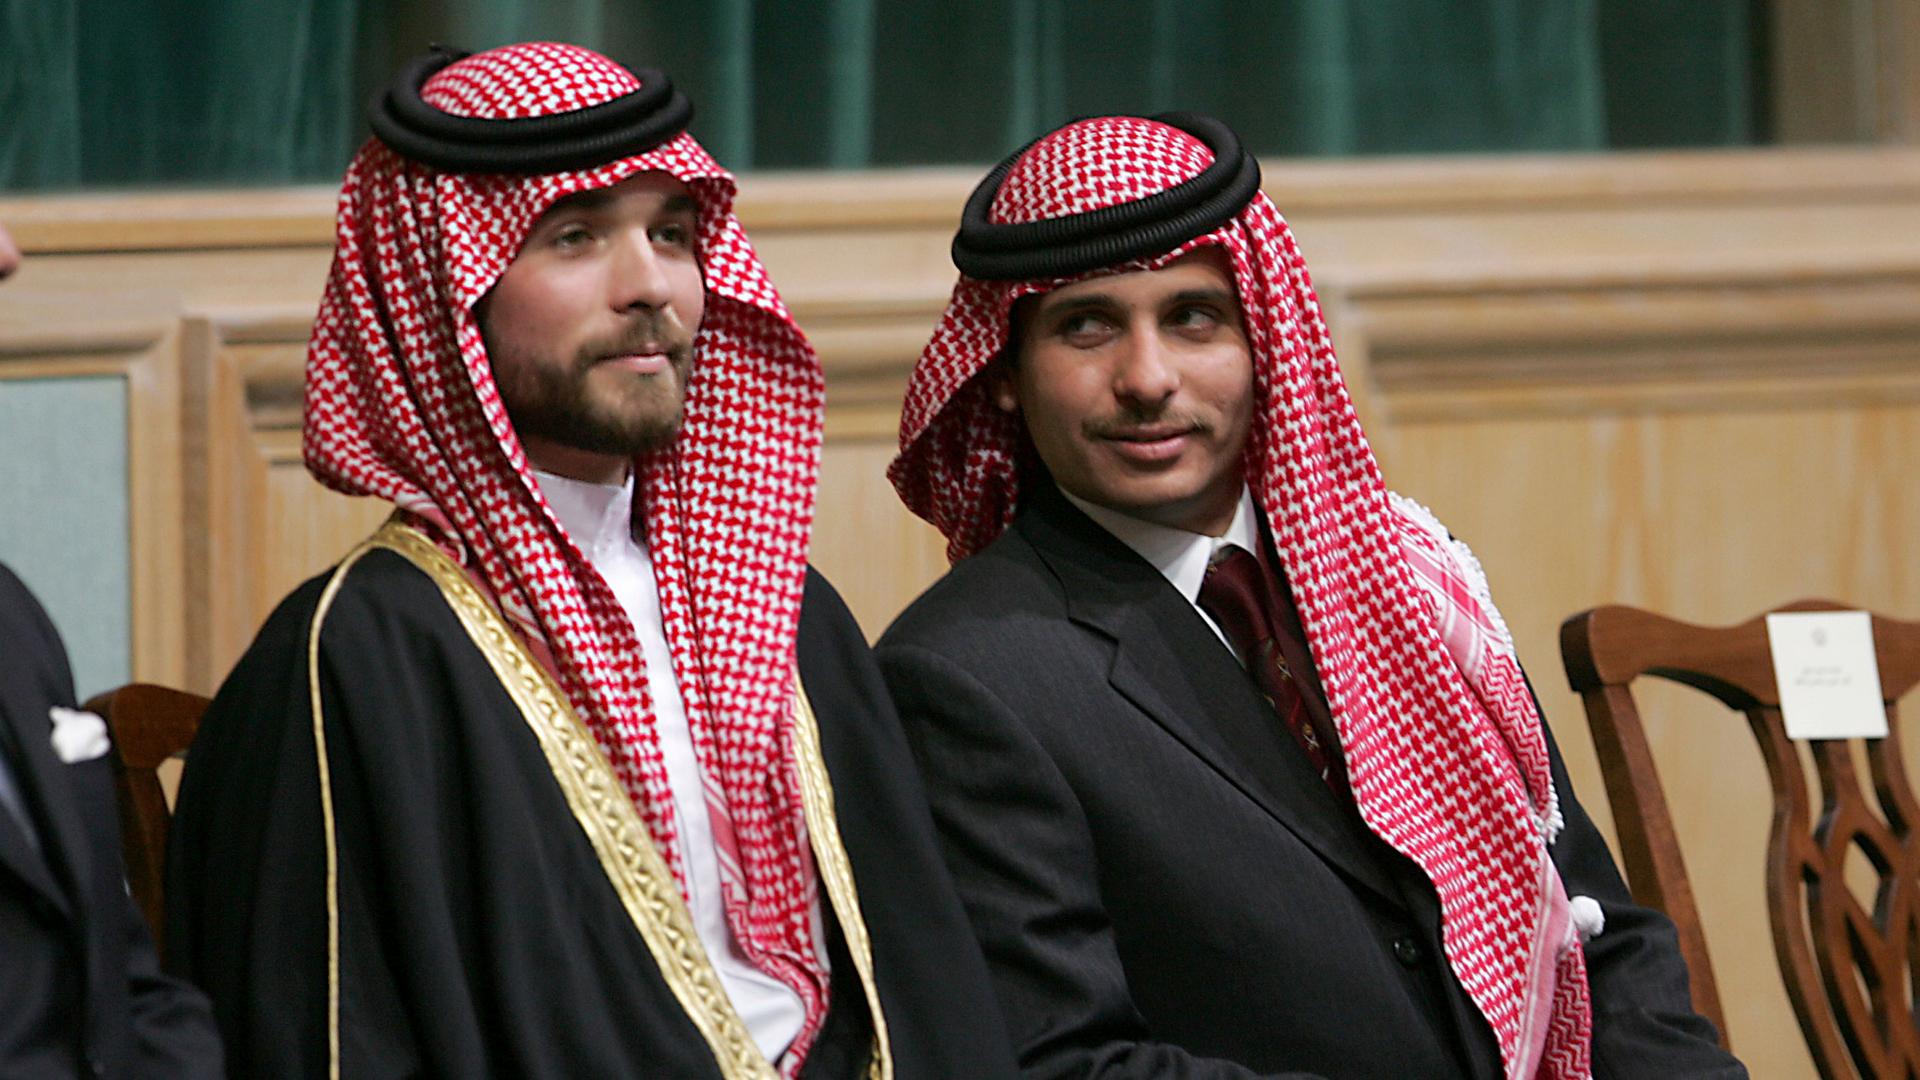 Prince Hamzah Bin Al-Hussein (R) and Prince Hashem Bin Al-Hussein (L) are shown sitting and wearing traditional red and white headscarves 